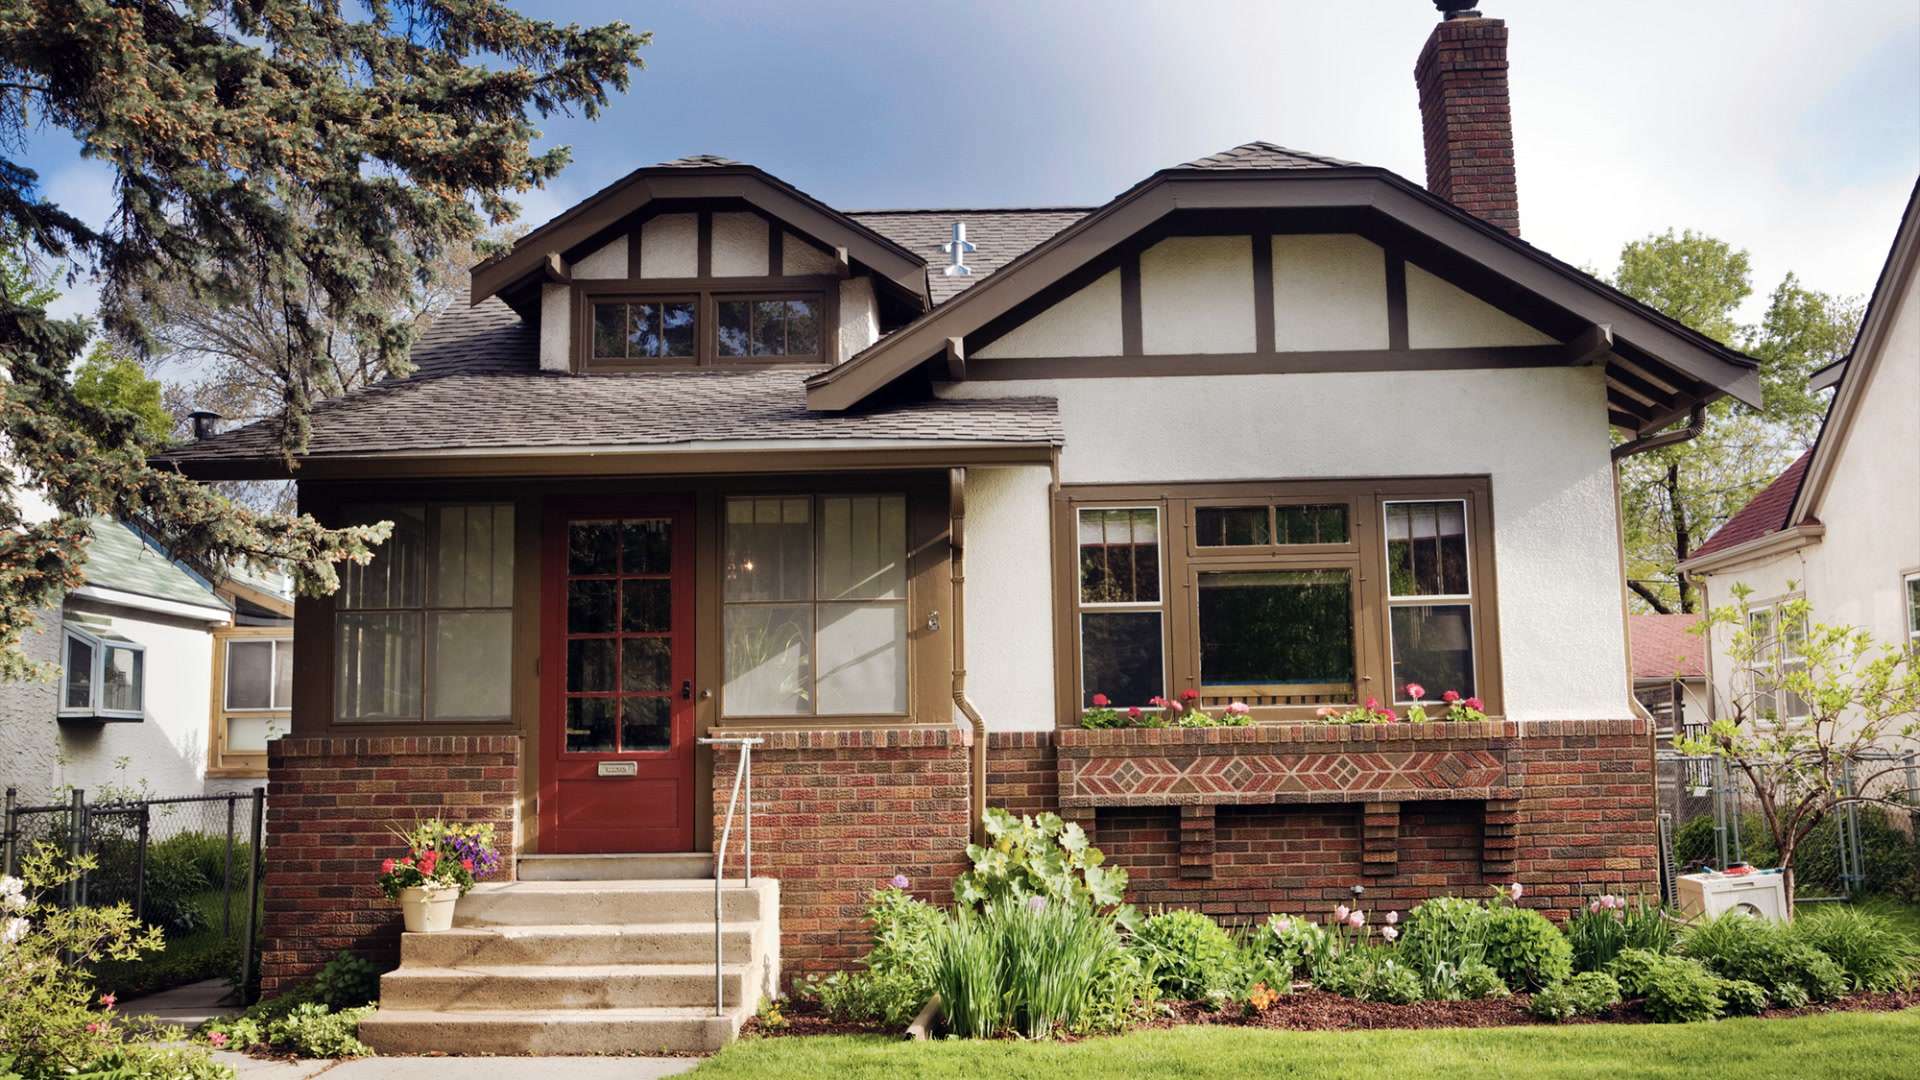 Important Things to Know Before Buying an Old House